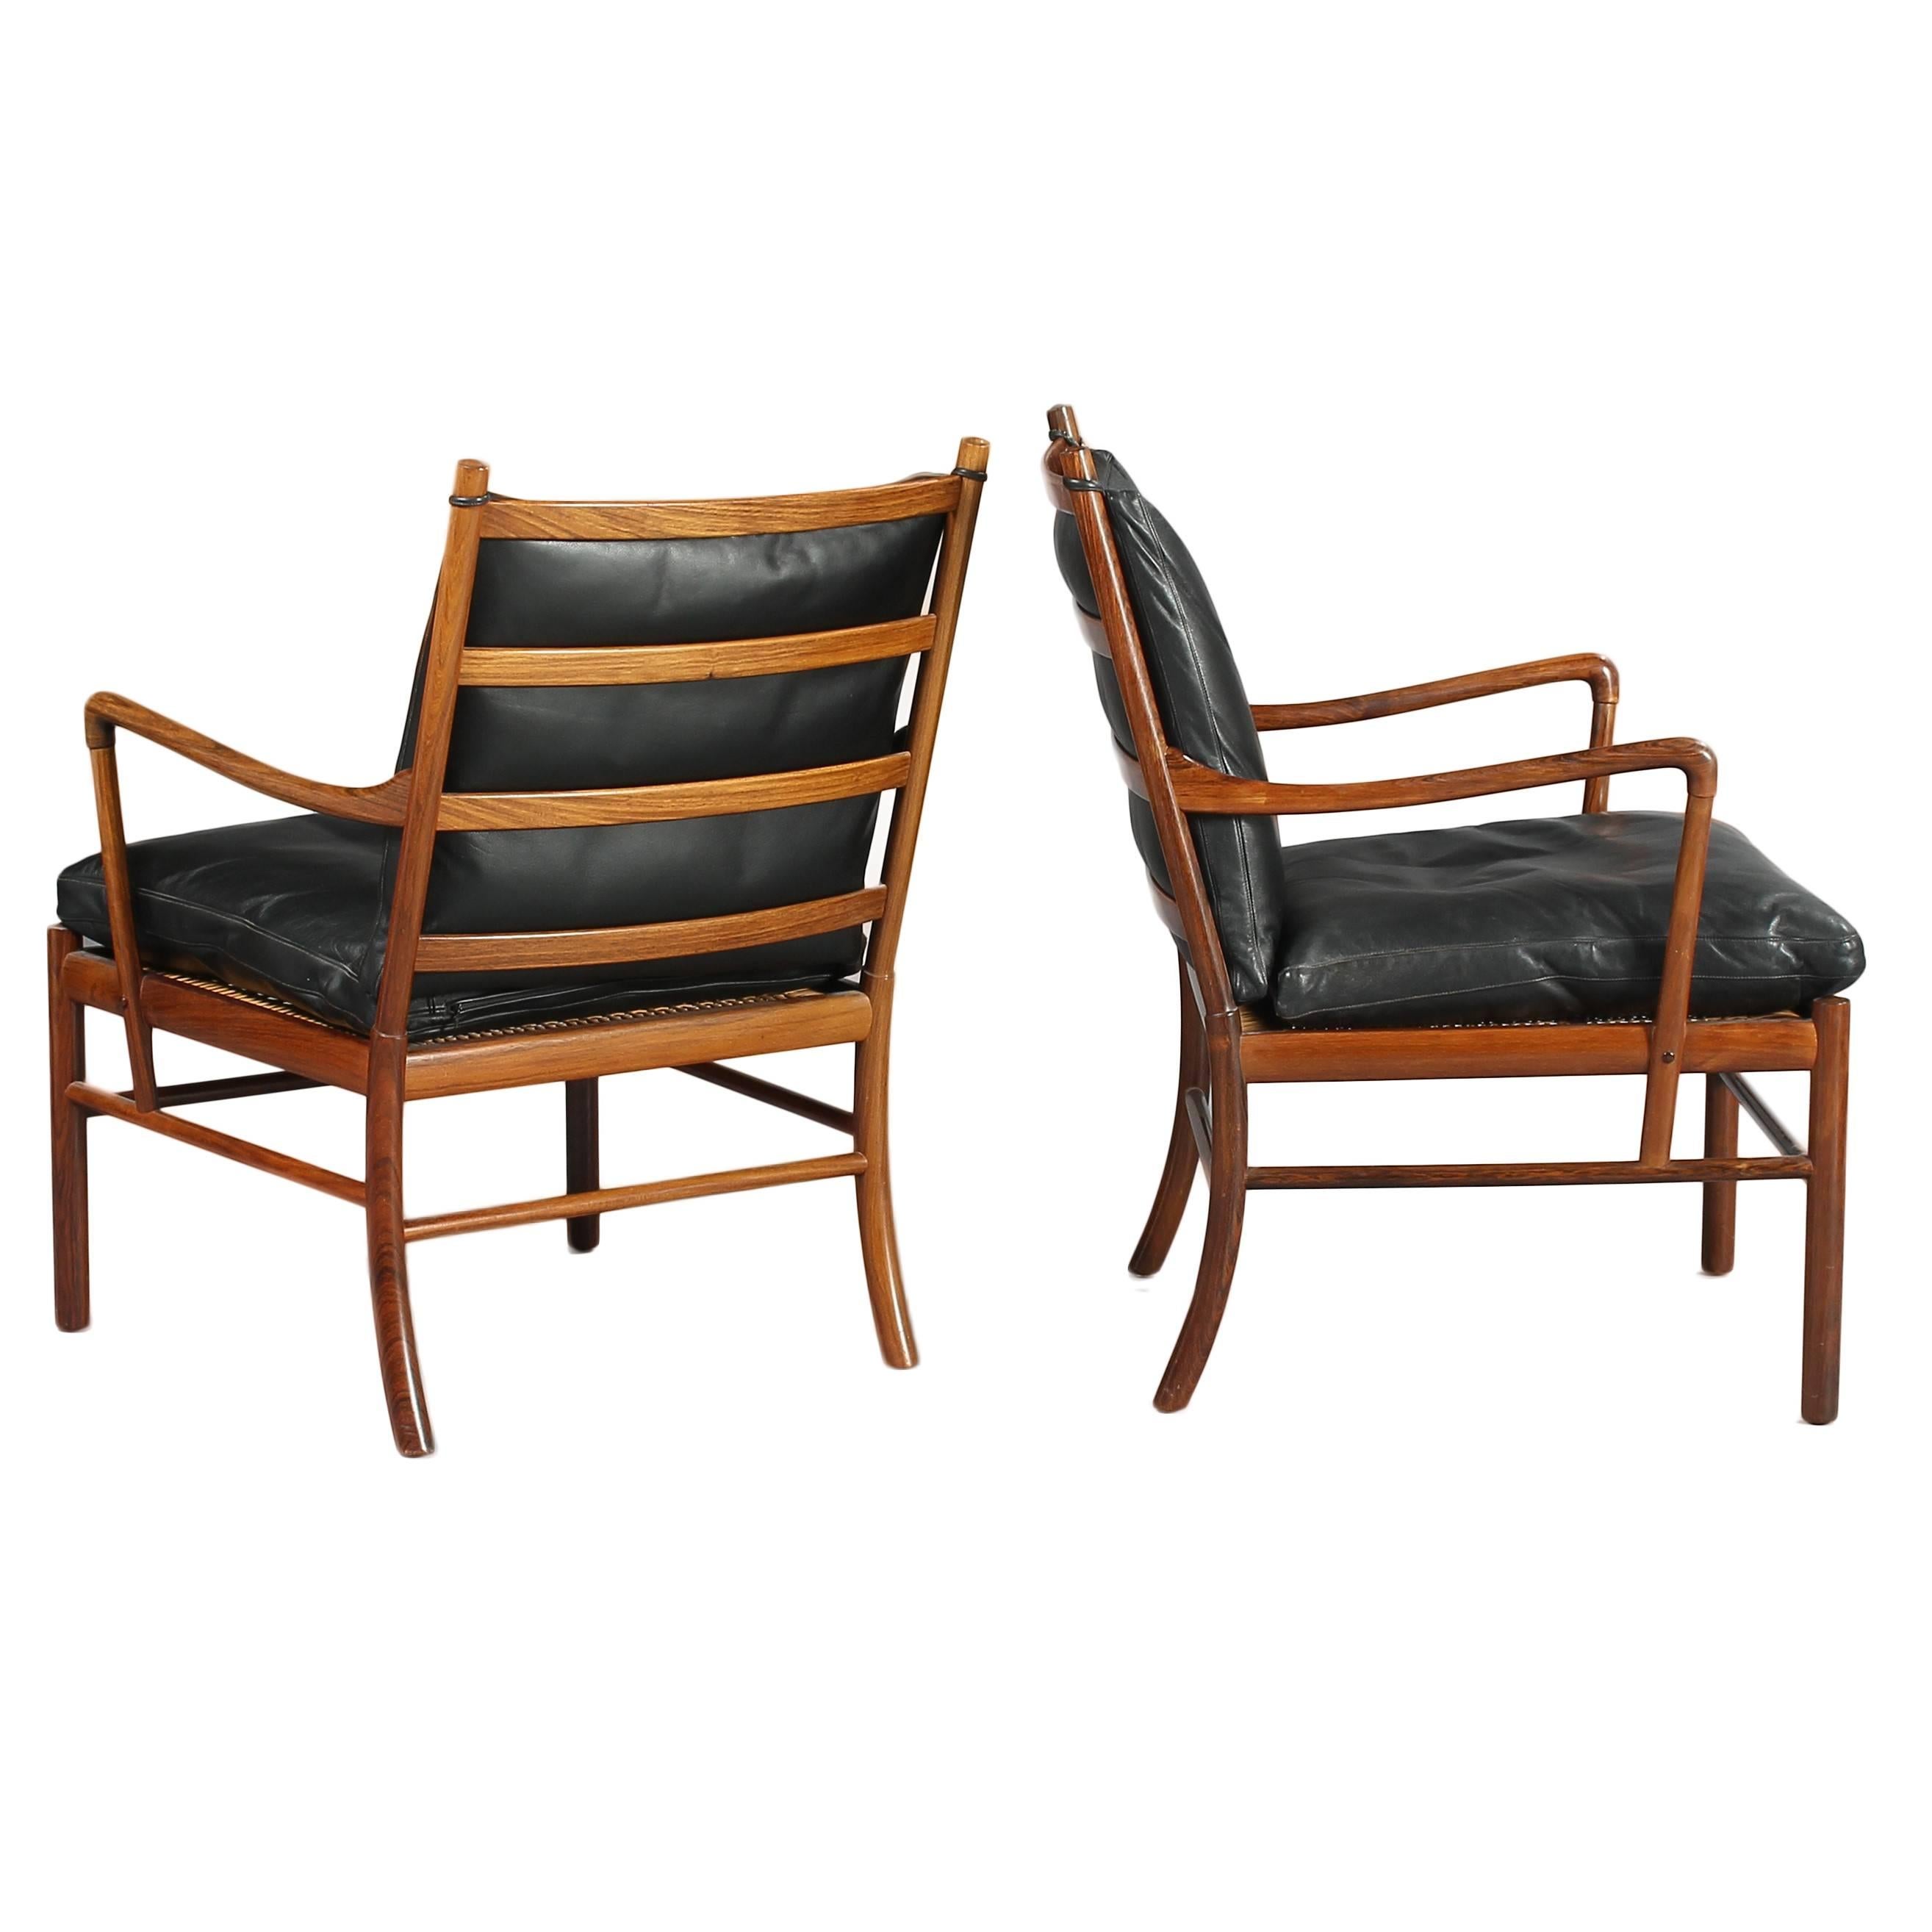 Scandinavian Modern 'Colonial' PJ149 Armchairs and Ottoman in Rosewood by O. Wanscher for P.Jeppesen